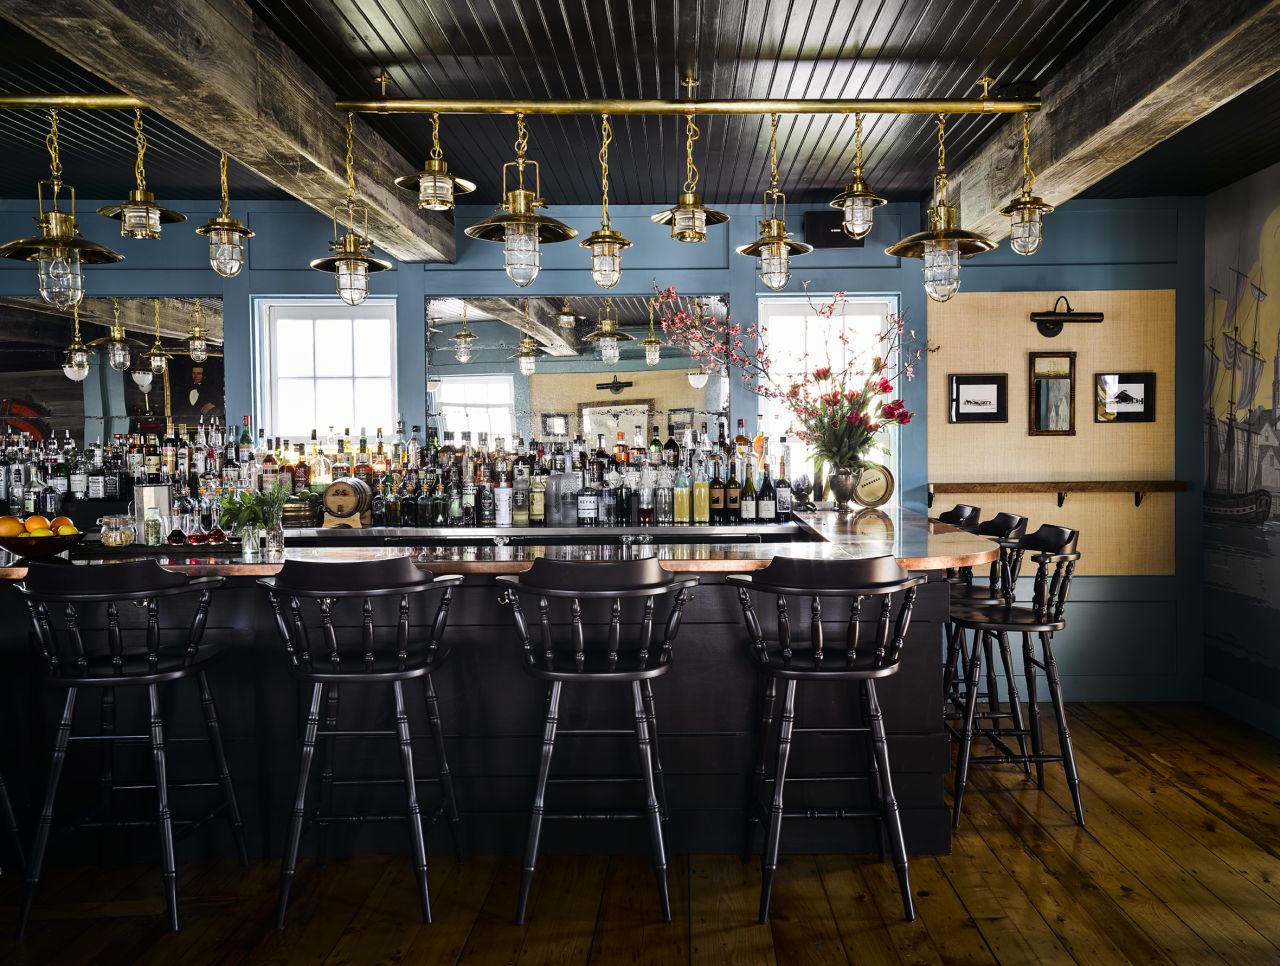 Housed in the 1850 Provincetown home of whaler Captain John Cook, Strangers & Saints is a cozy new Mediterranean gastro-pub featuring local ingredients with a modern spin.